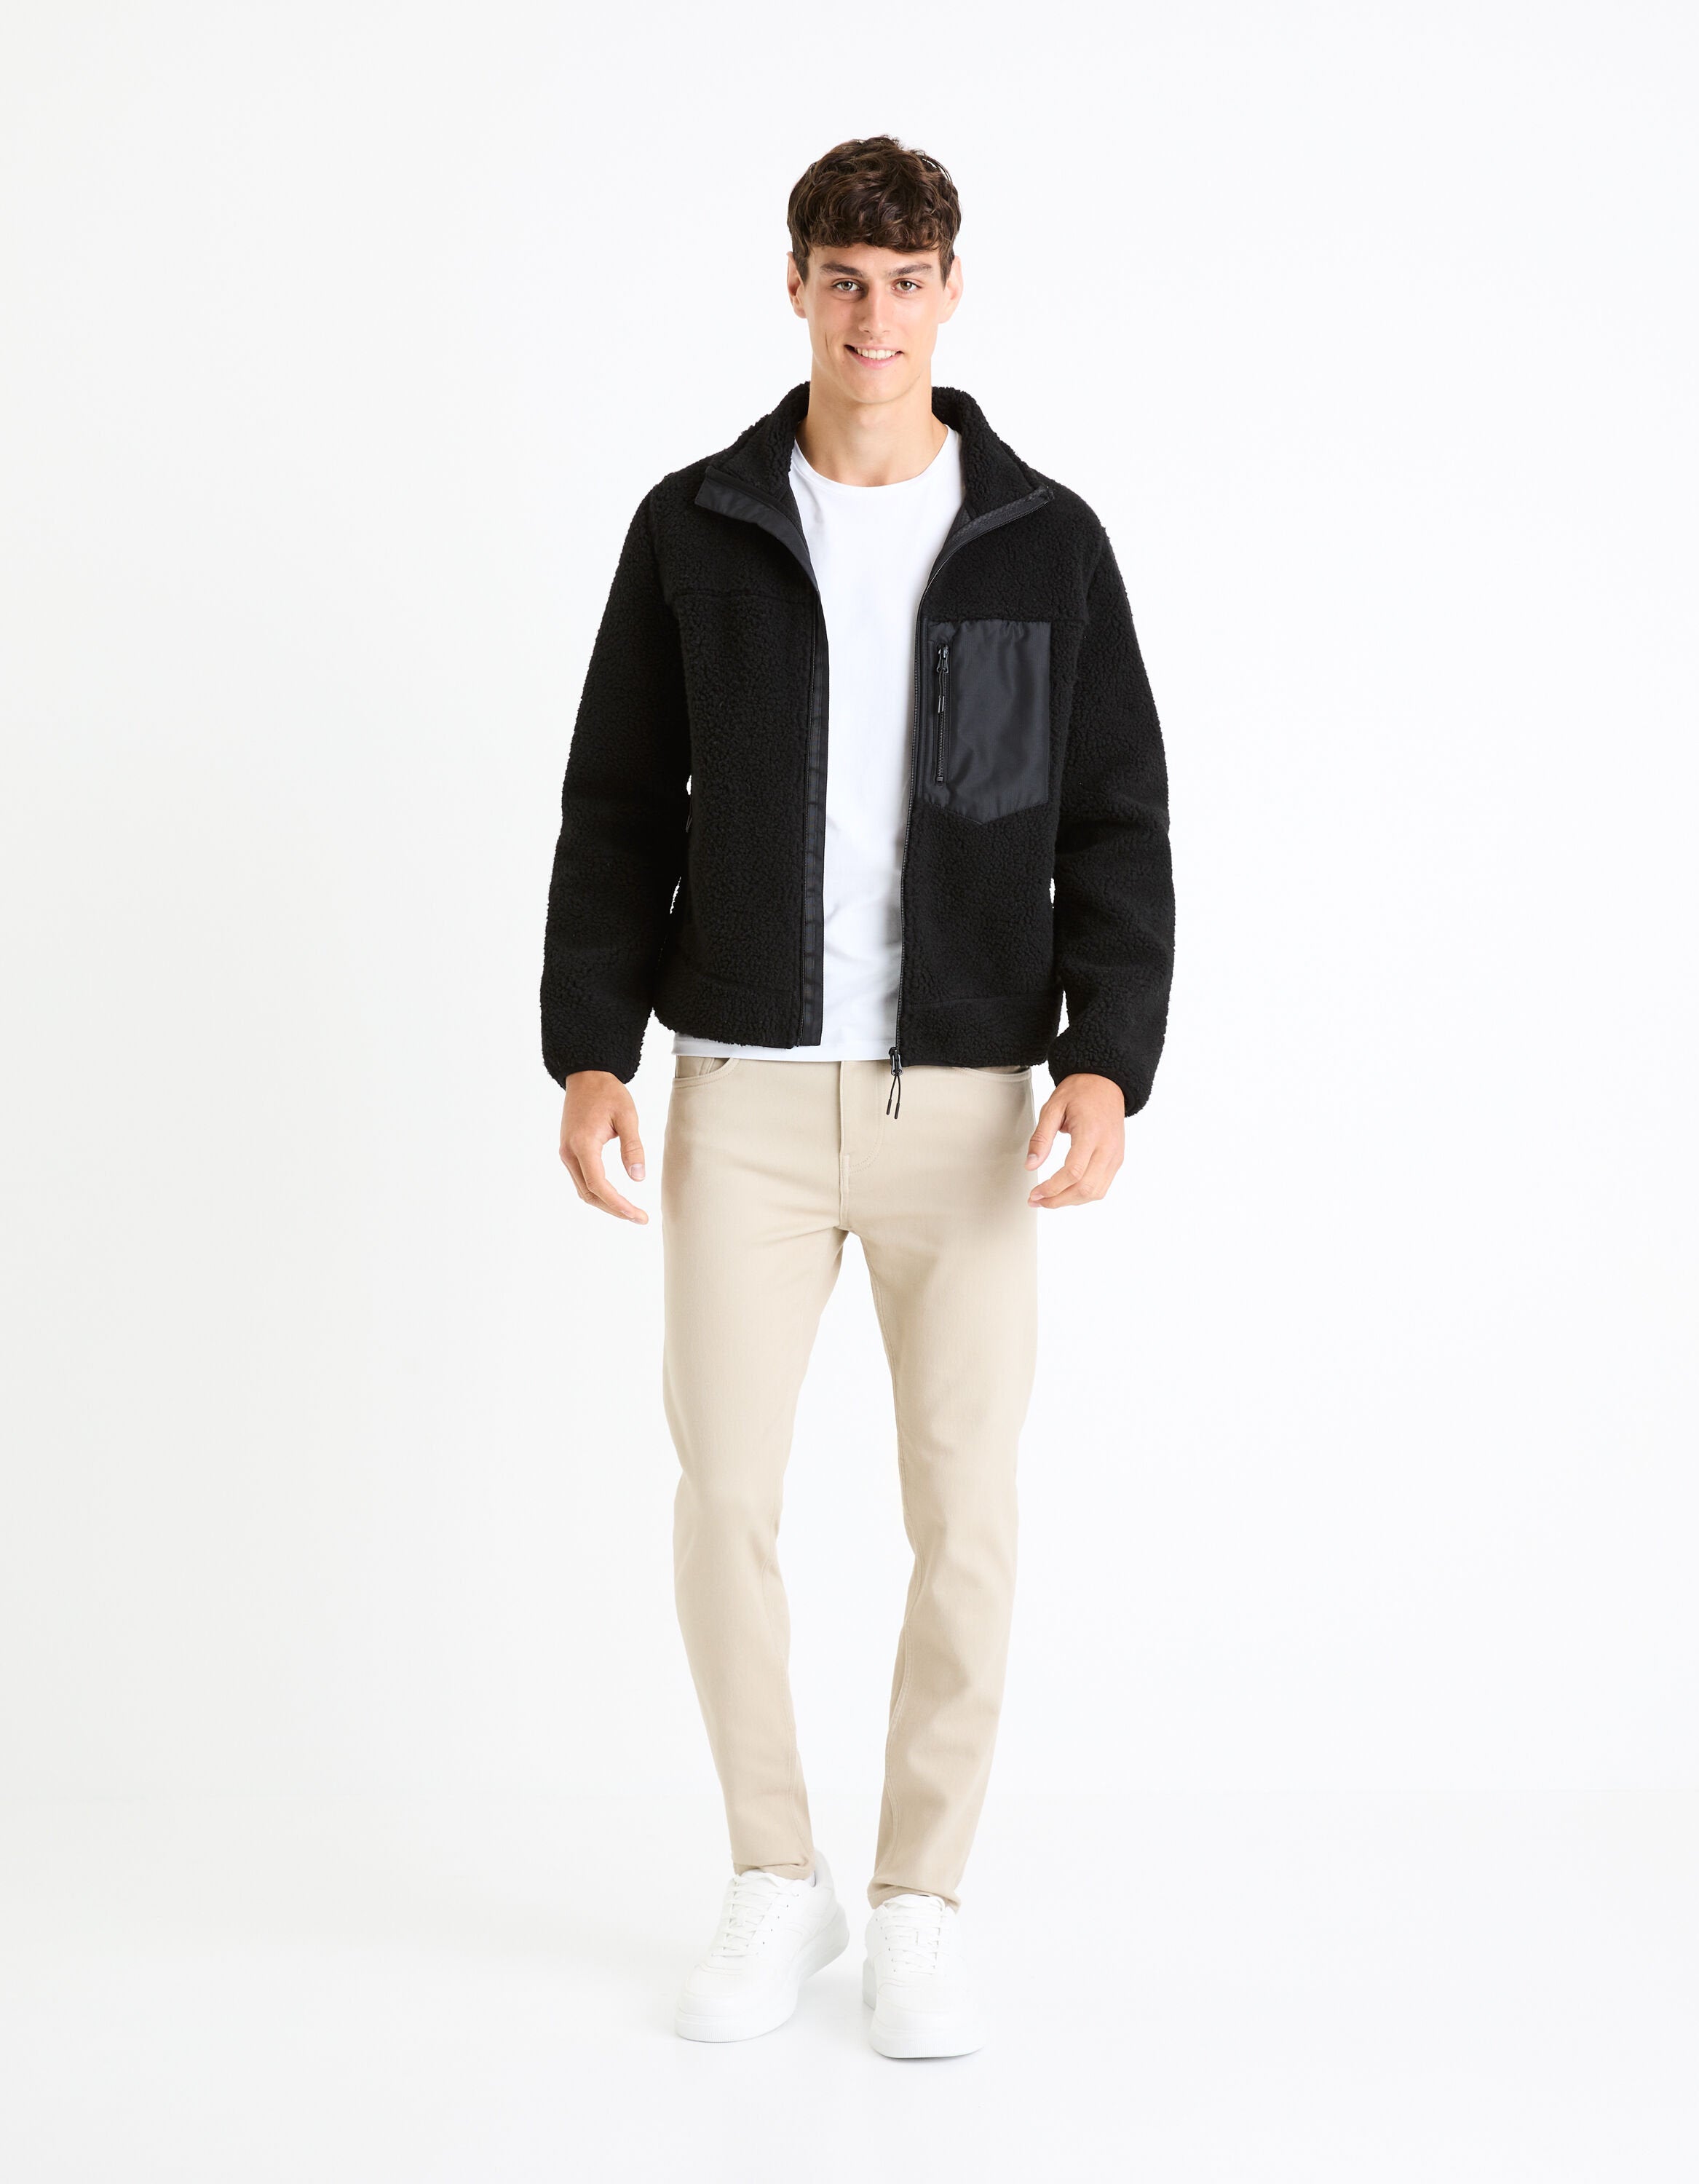 Sherpa Jacket With Stand-Up Collar_FUCURLY_BLACK_03